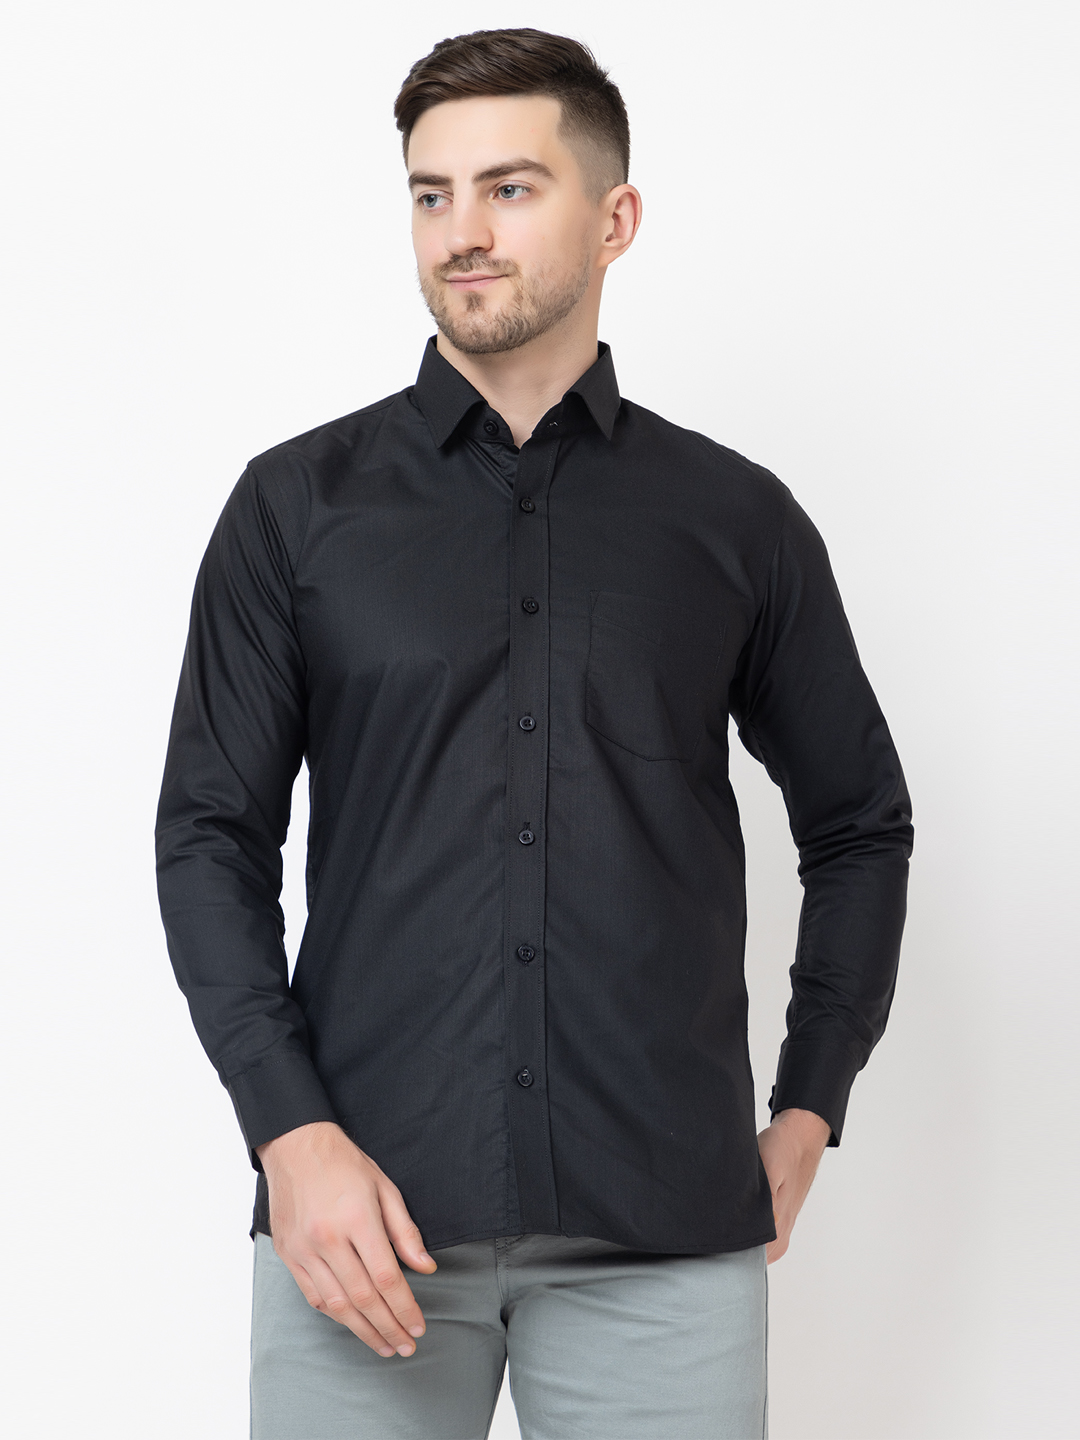 Buy Black Shirts for Men Online In India - ExperianceClothing